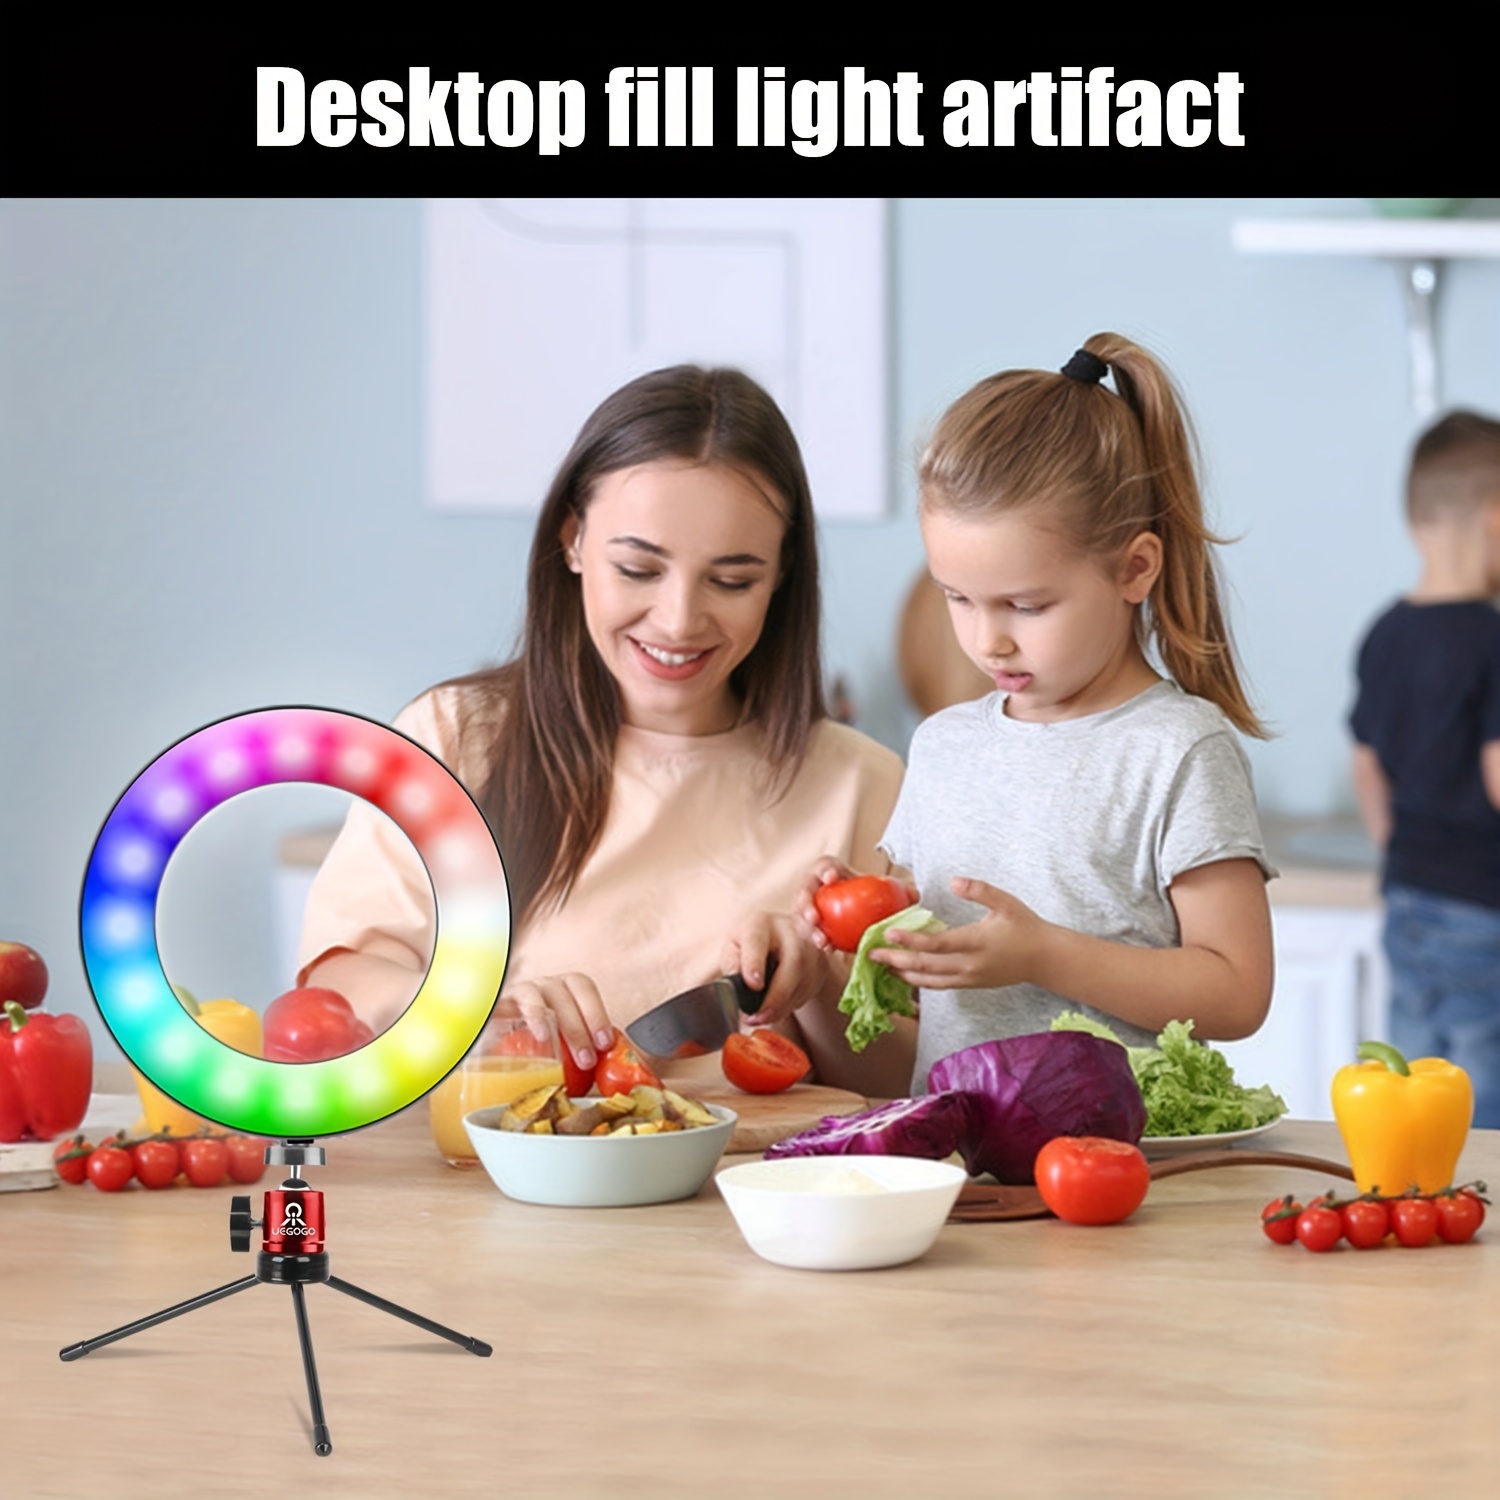 USB 10' Ring Light for Desk with Stand and Phone Holder, Ring Light with  Overhead Camera Mount and Adjustable Desk Arm Stand for Photography,Makeup